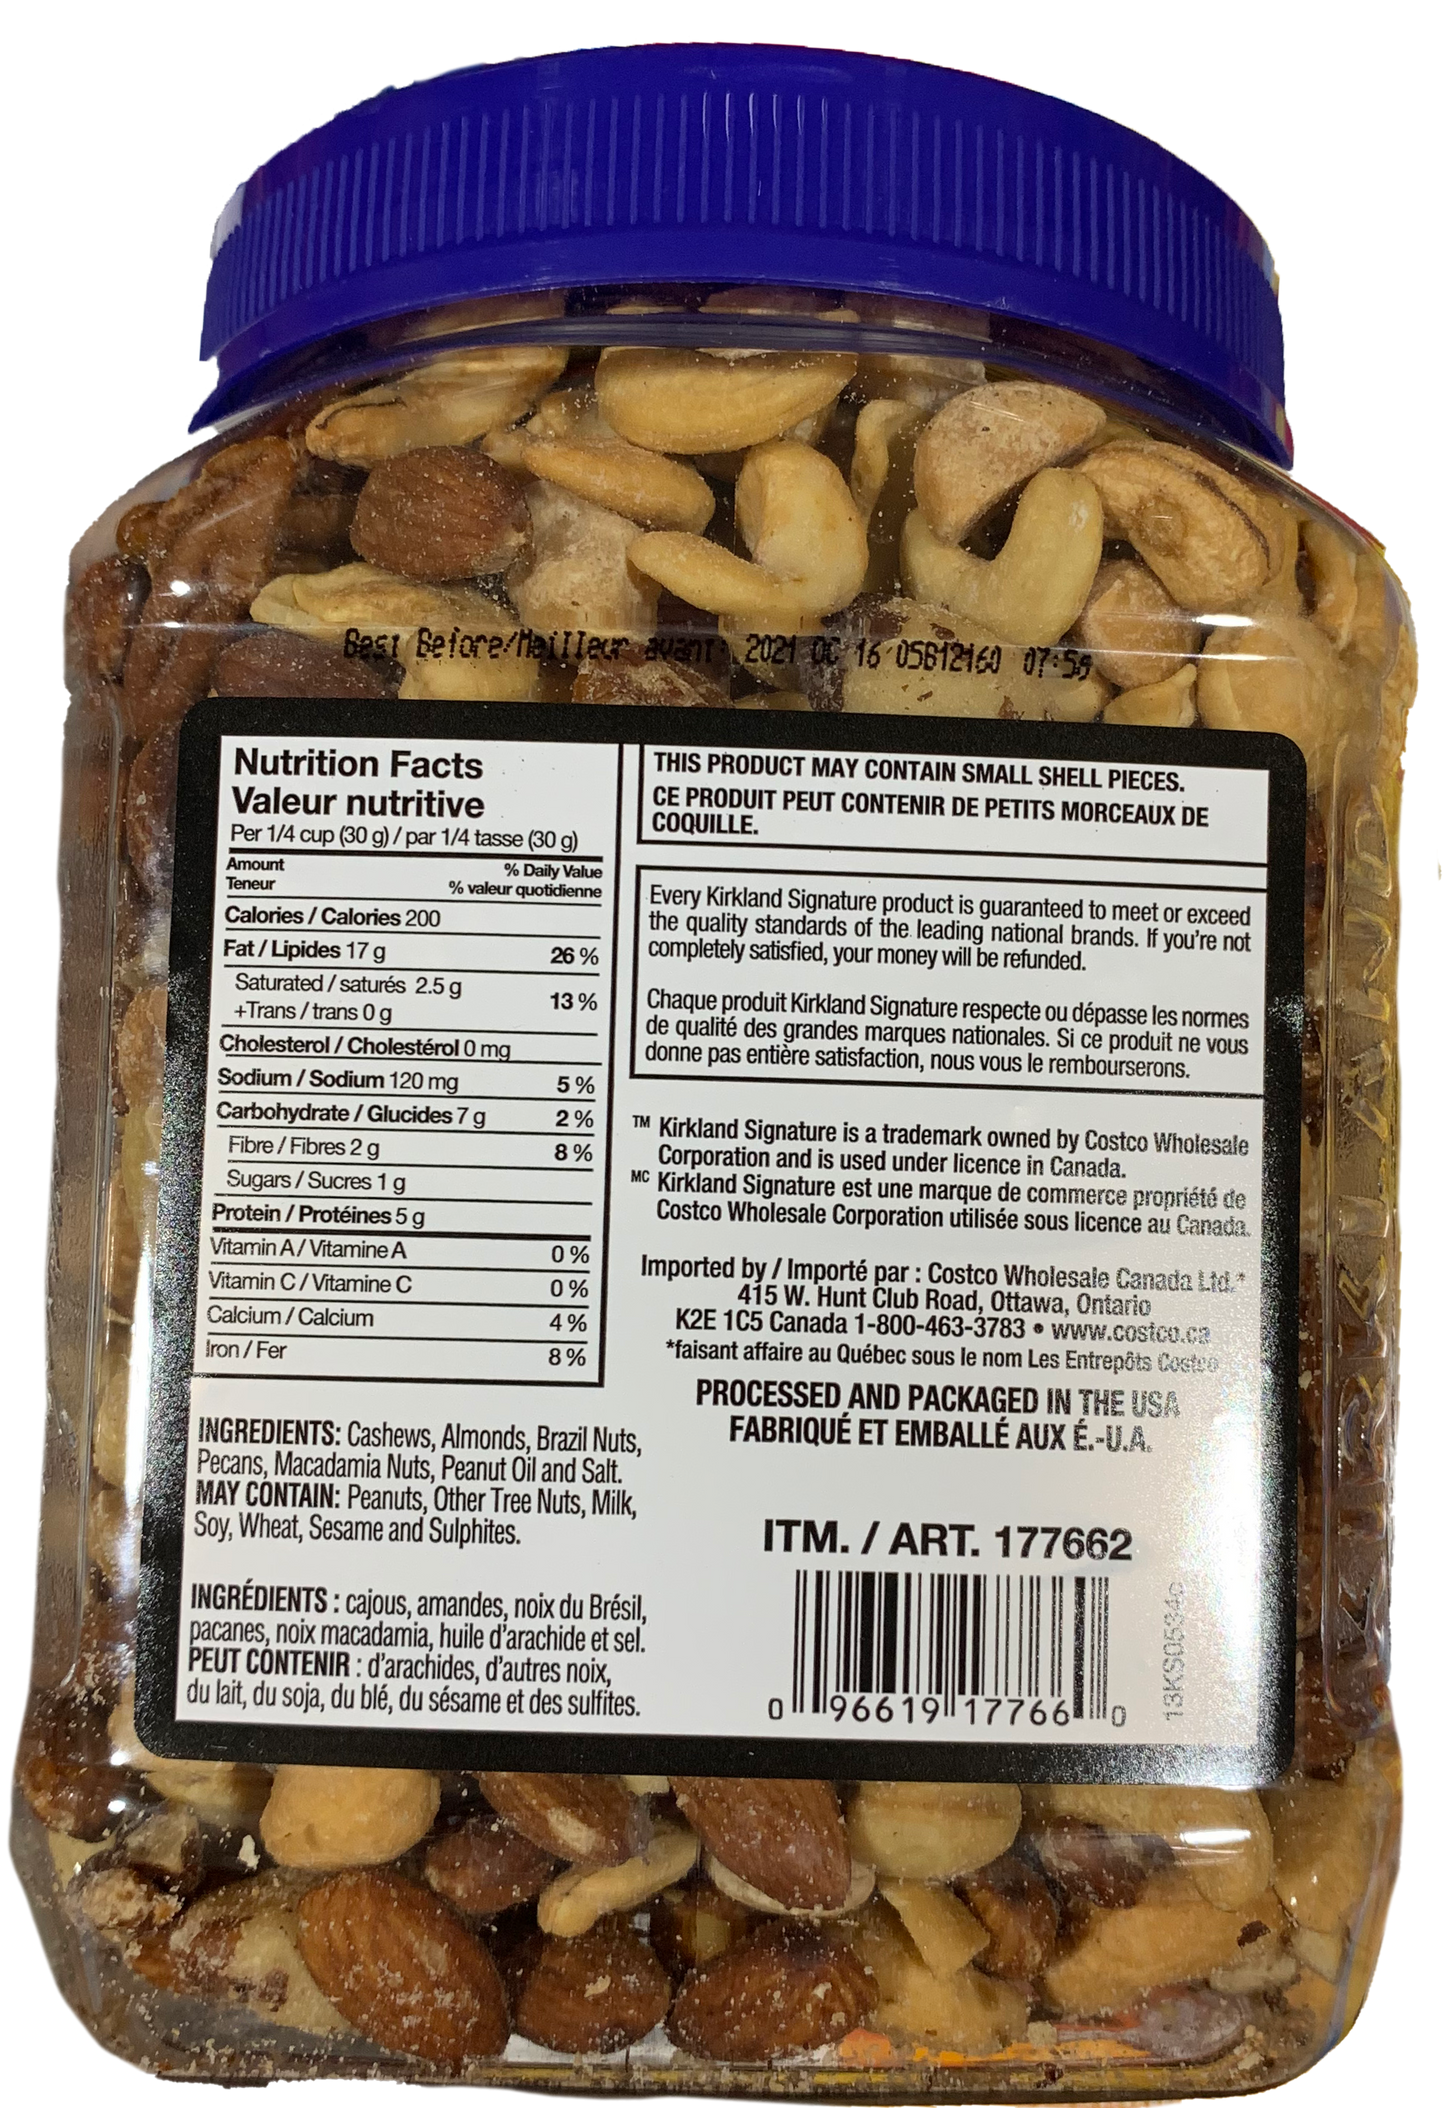 Kirkland Salted Mixed Nuts (2-pack)